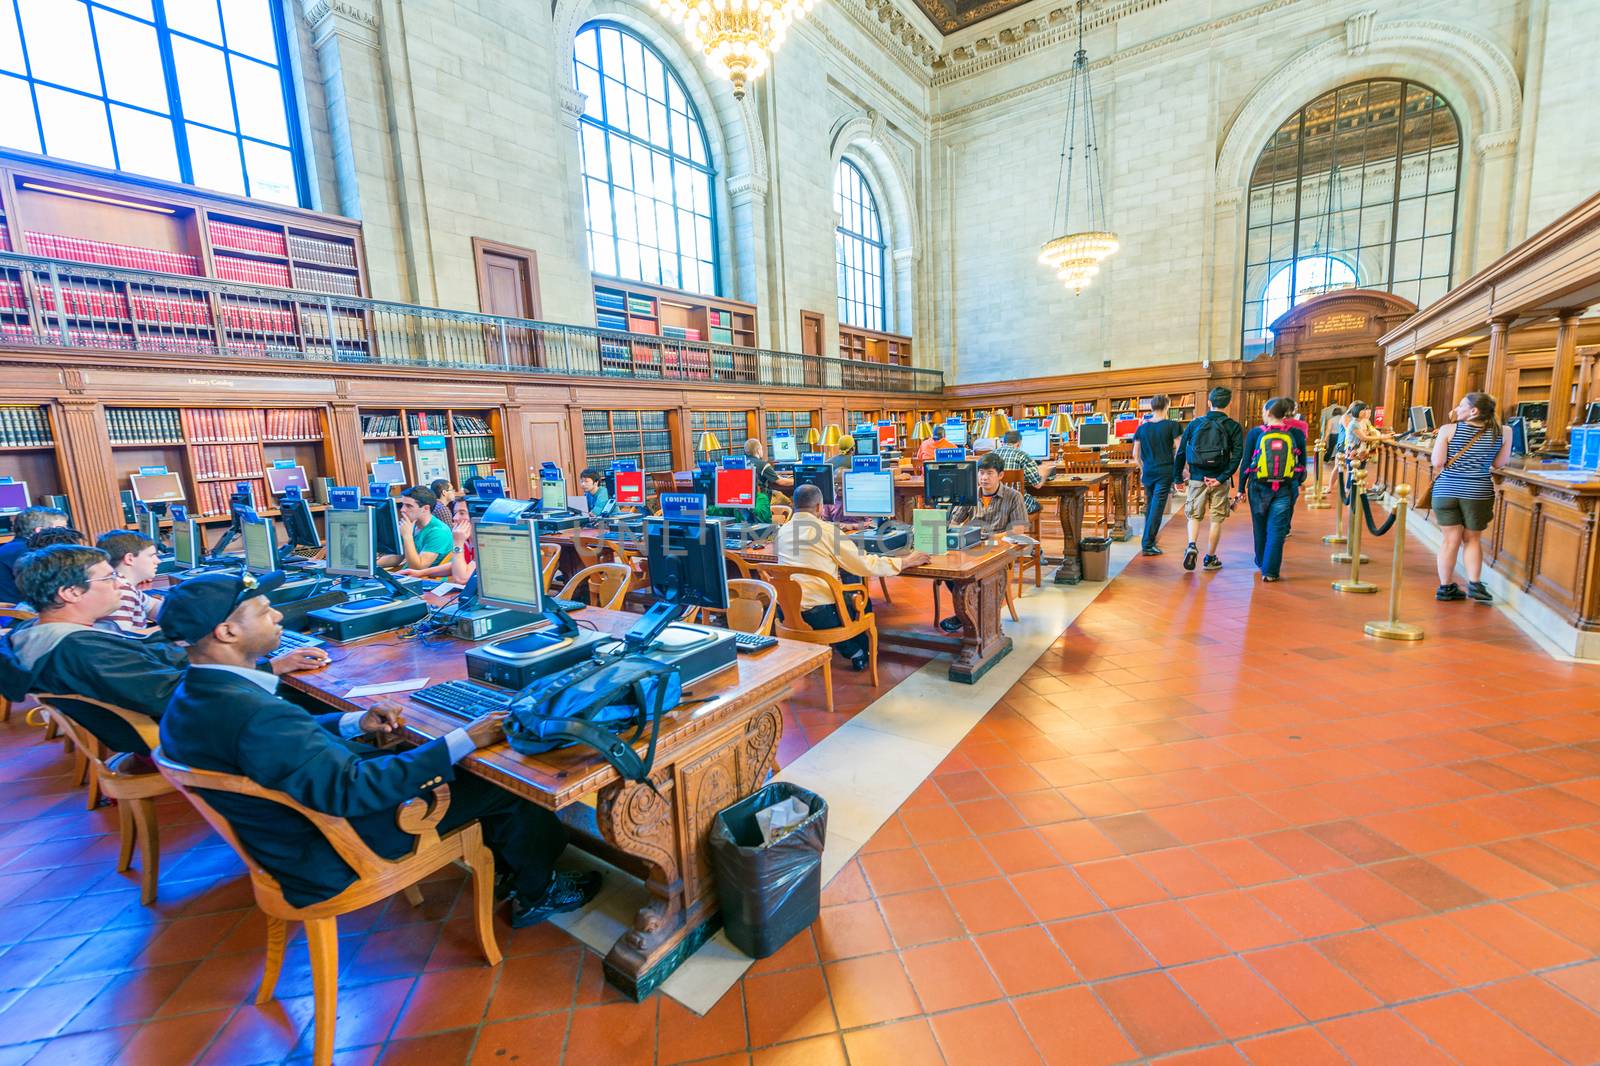 NEW YORK CITY - MAY 20: Interior of New York Public Library on May 20, 2013 in Manhattan, New York City. New York Public Library is the third largest public library in North America